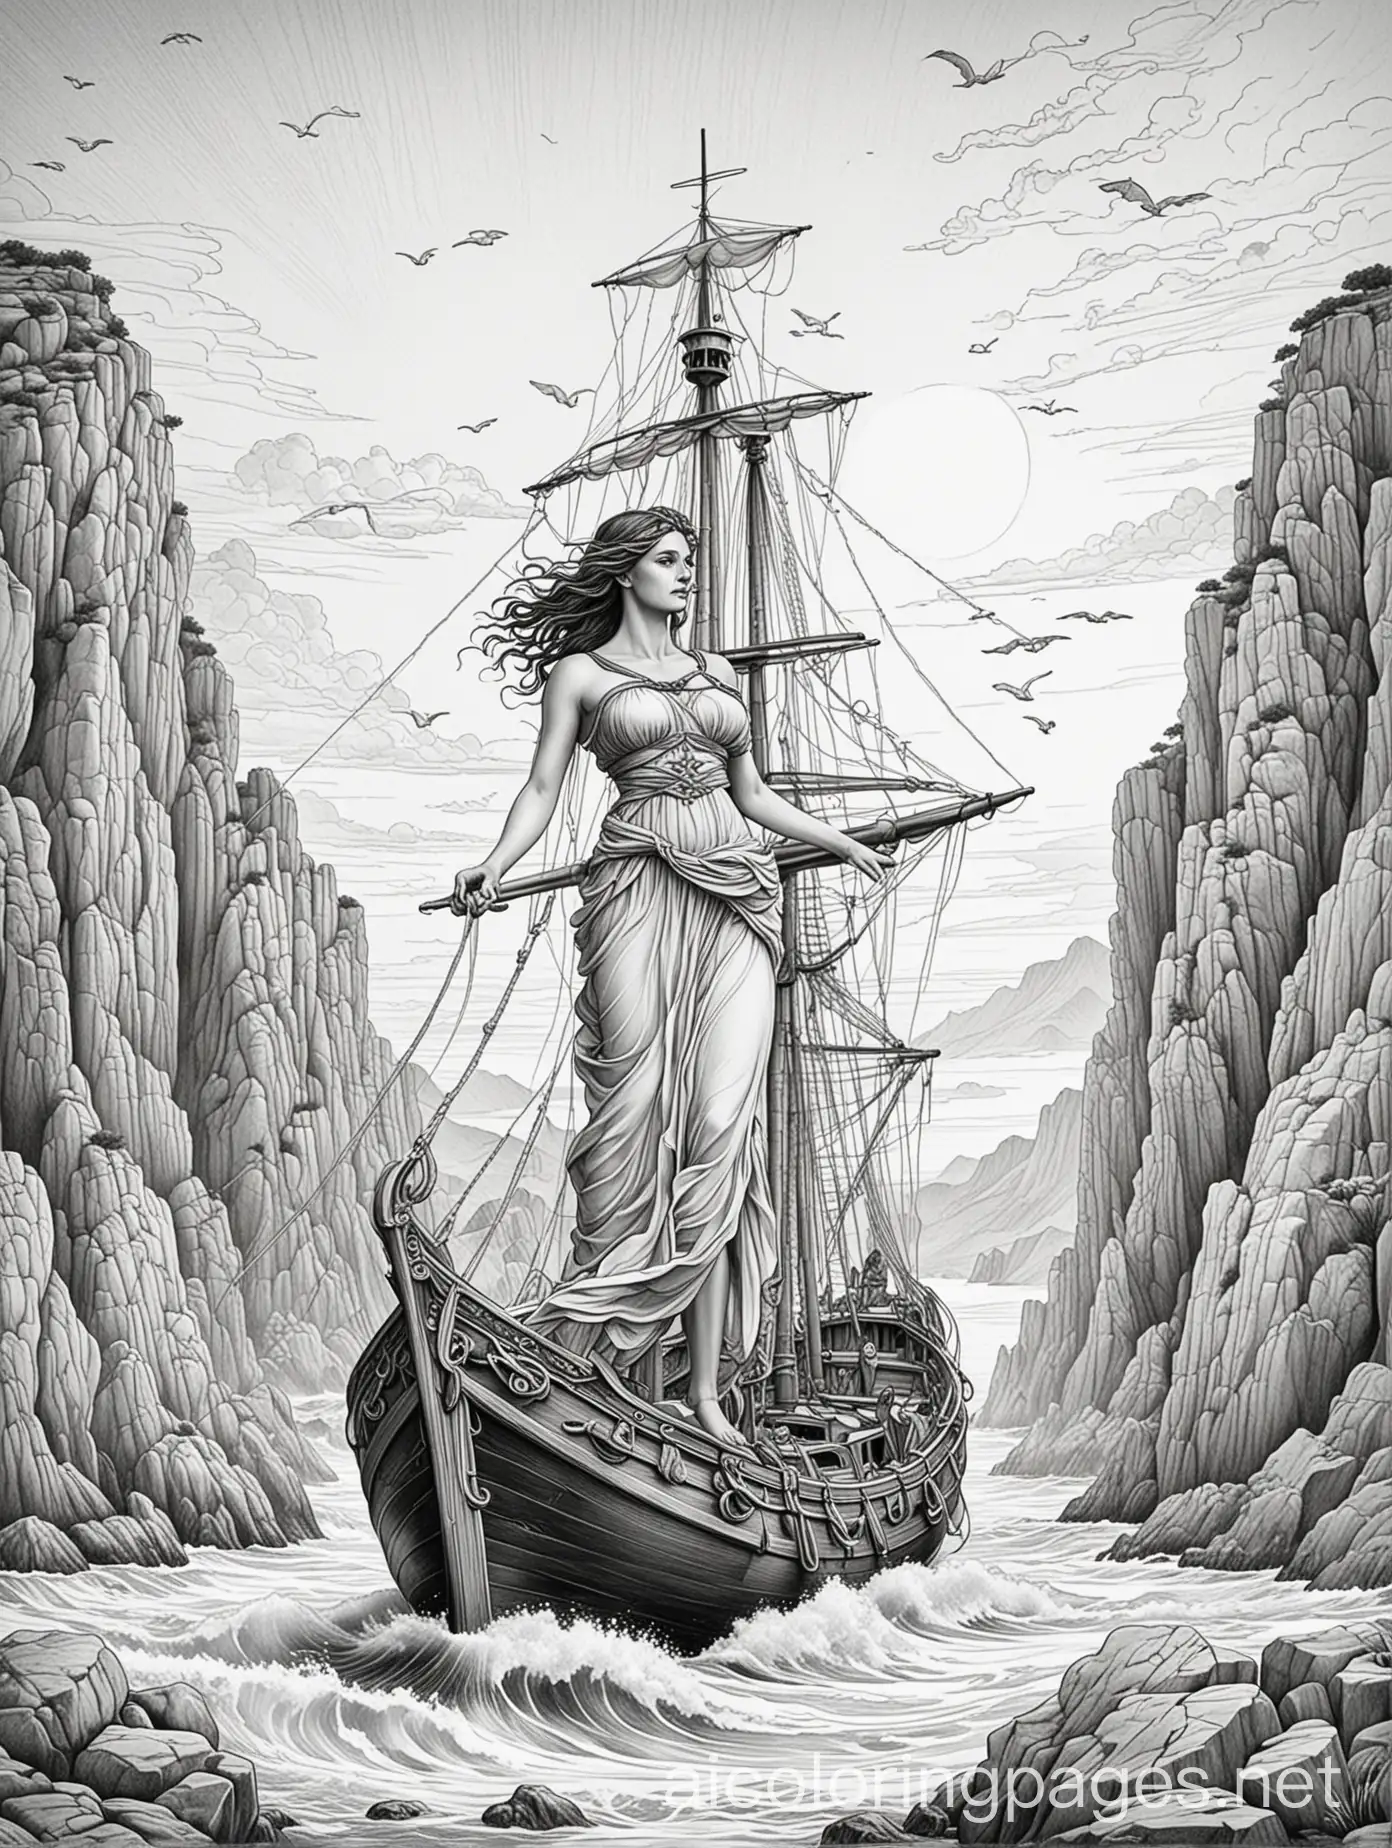 *classical style fine illustration for a coloring book of the greek myth: *The Sirens’ Song** - Odysseus tied to the mast of his ship, the Sirens beautifully but menacingly luring from nearby rocks., Coloring Page, black and white, line art, white background, Simplicity, Ample White Space. The background of the coloring page is plain white to make it easy for young children to color within the lines. The outlines of all the subjects are easy to distinguish, making it simple for kids to color without too much difficulty